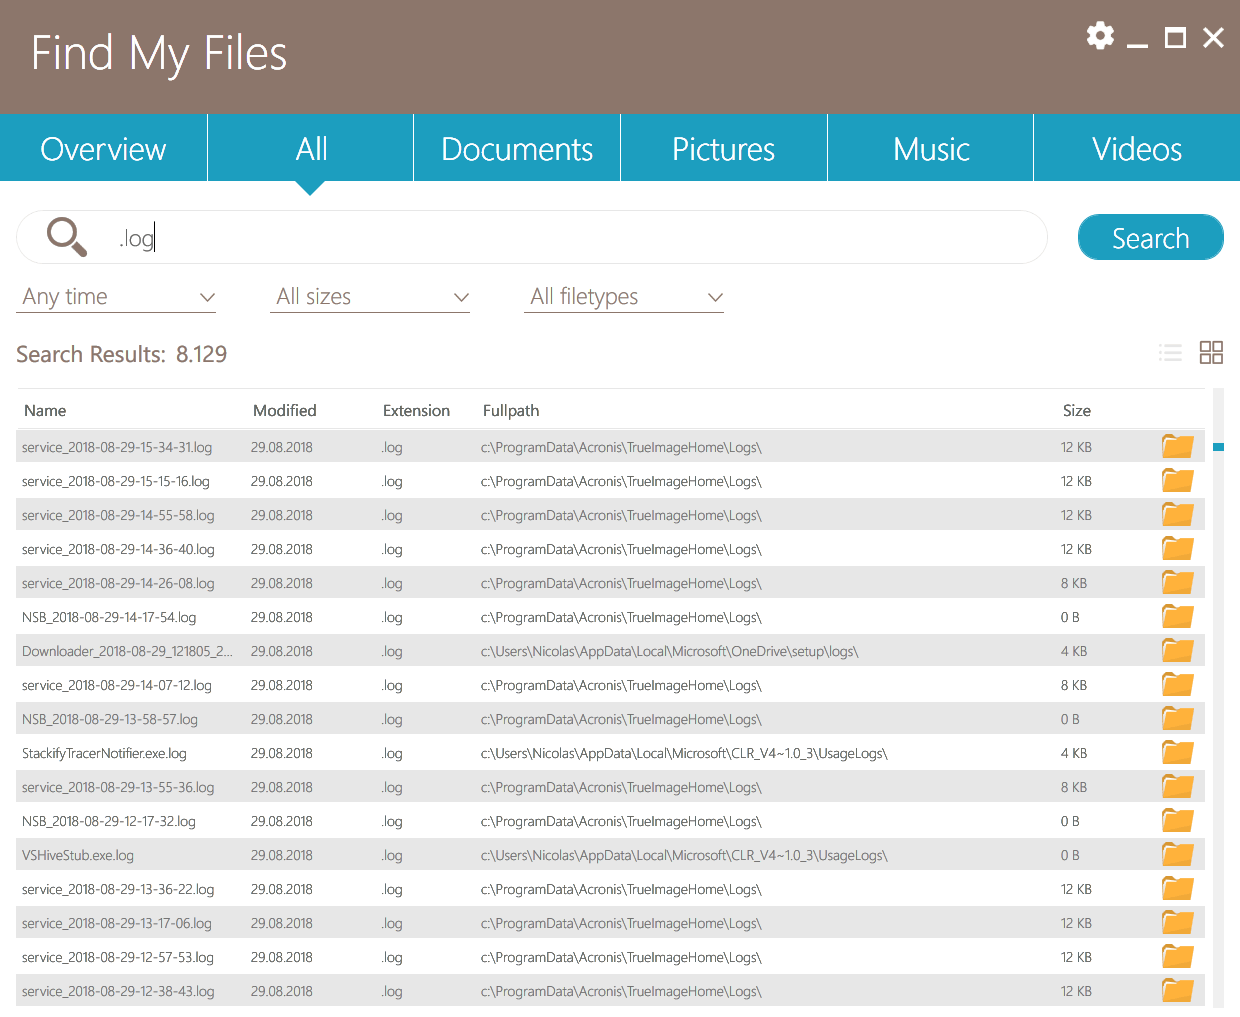 With Find My Files you can find your data easily and quickly